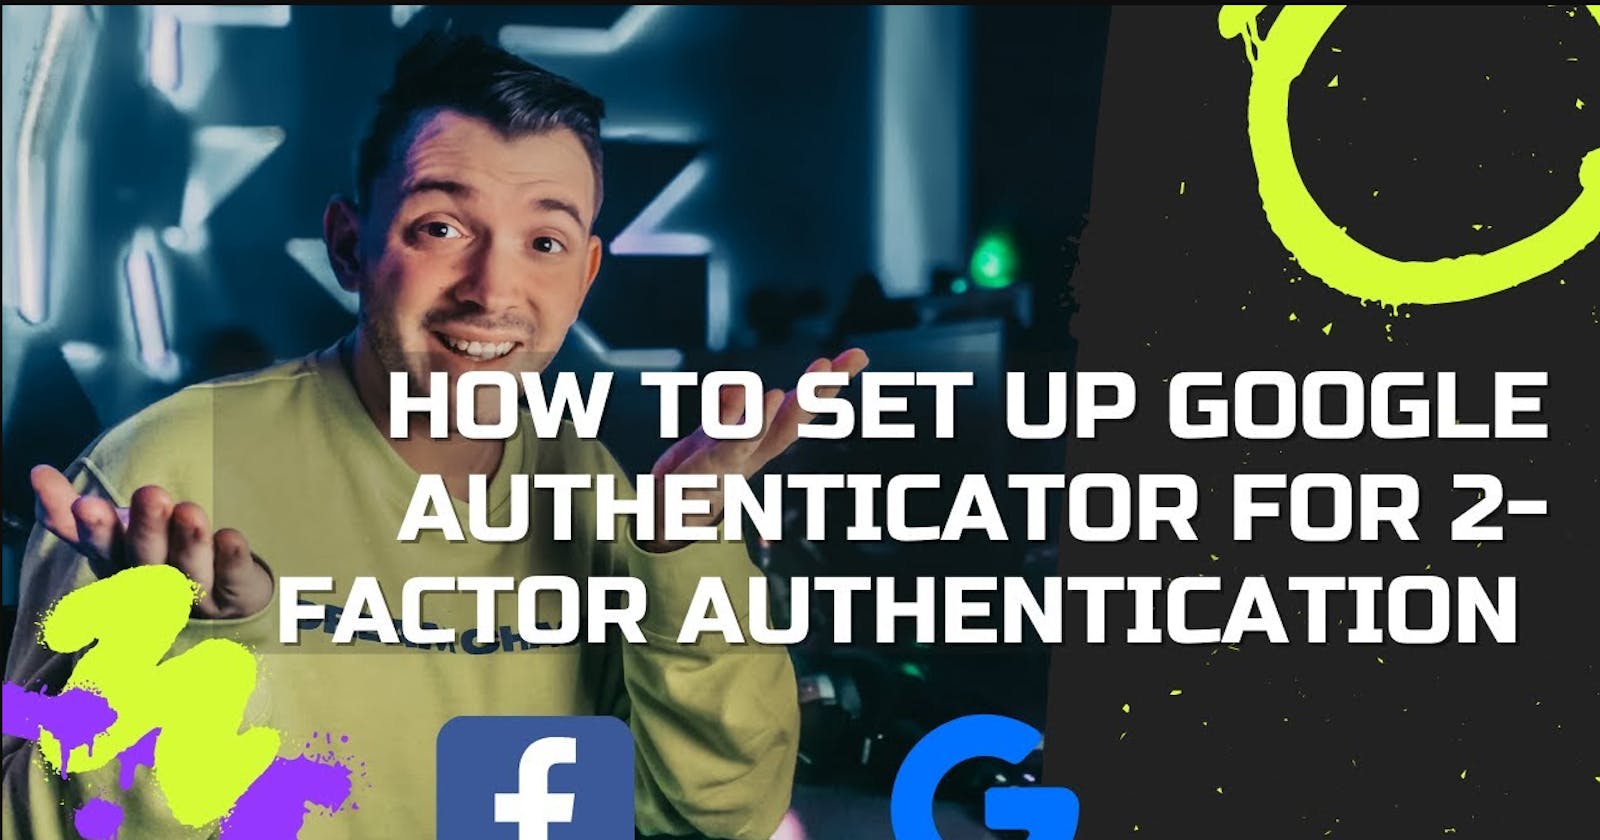 How to Set Up Google Authenticator for 2-Factor Authentication 2021 Facebook